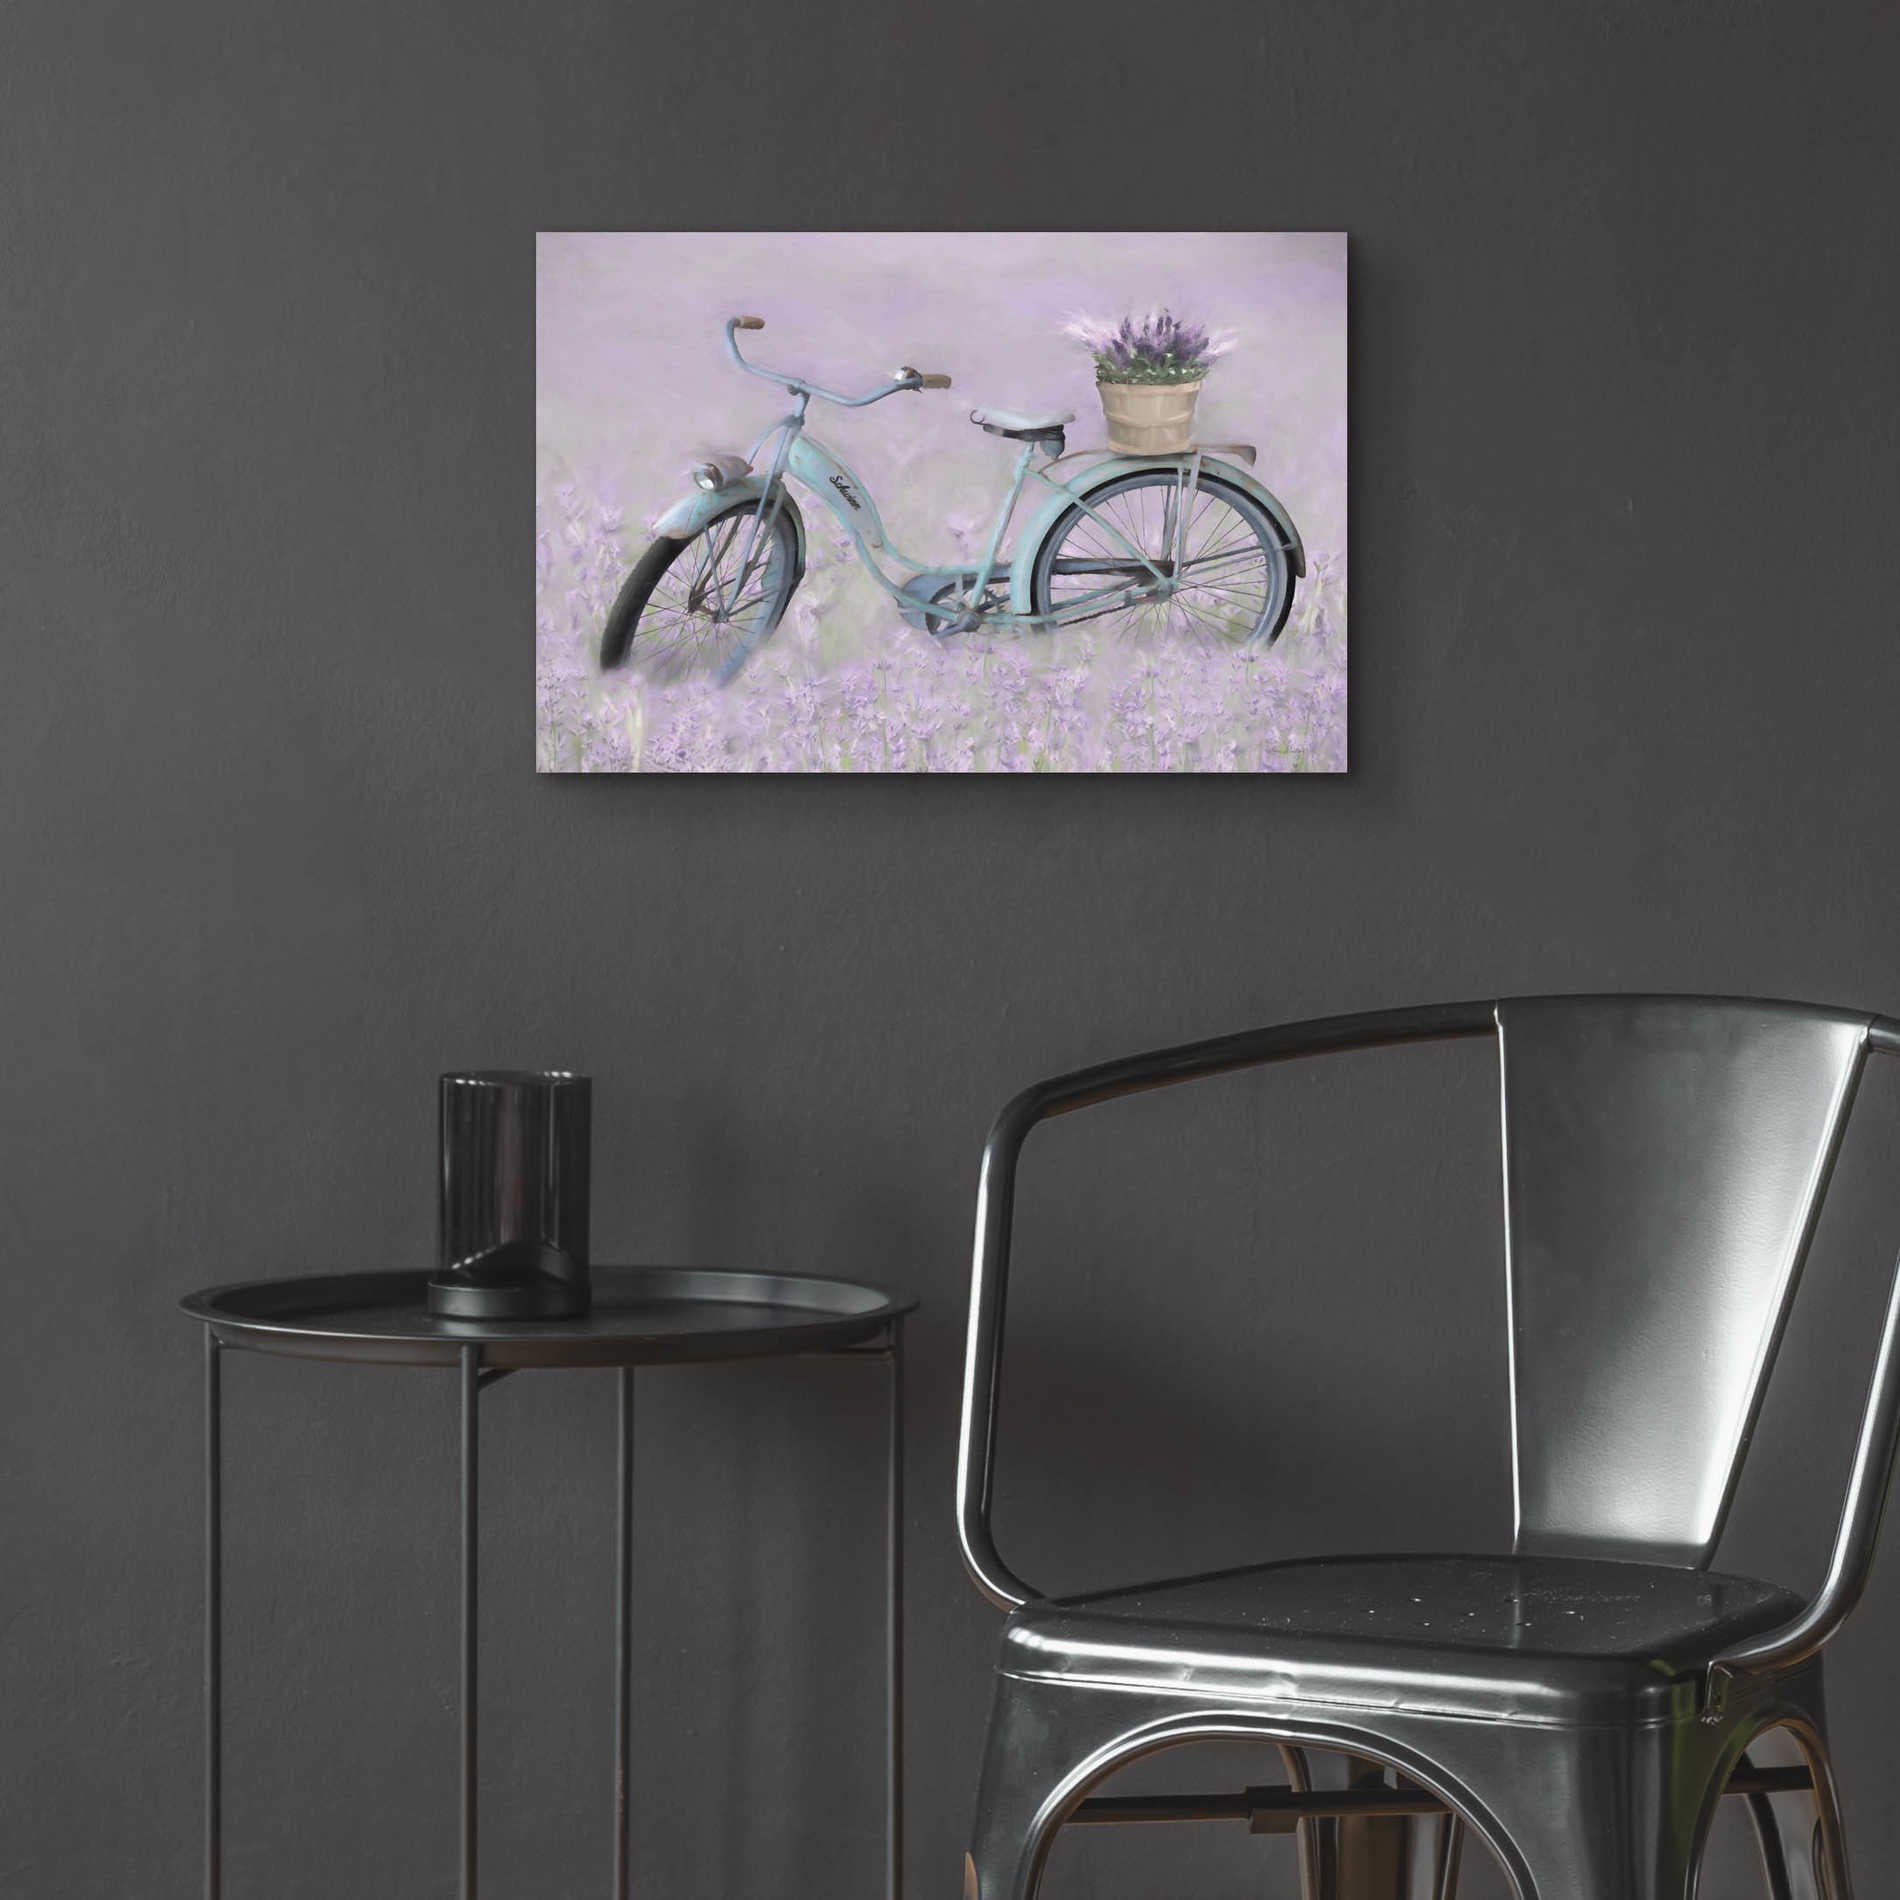 Epic Art 'Bicycle in Lavender' by Lori Deiter Acrylic Glass Wall Art,24x16